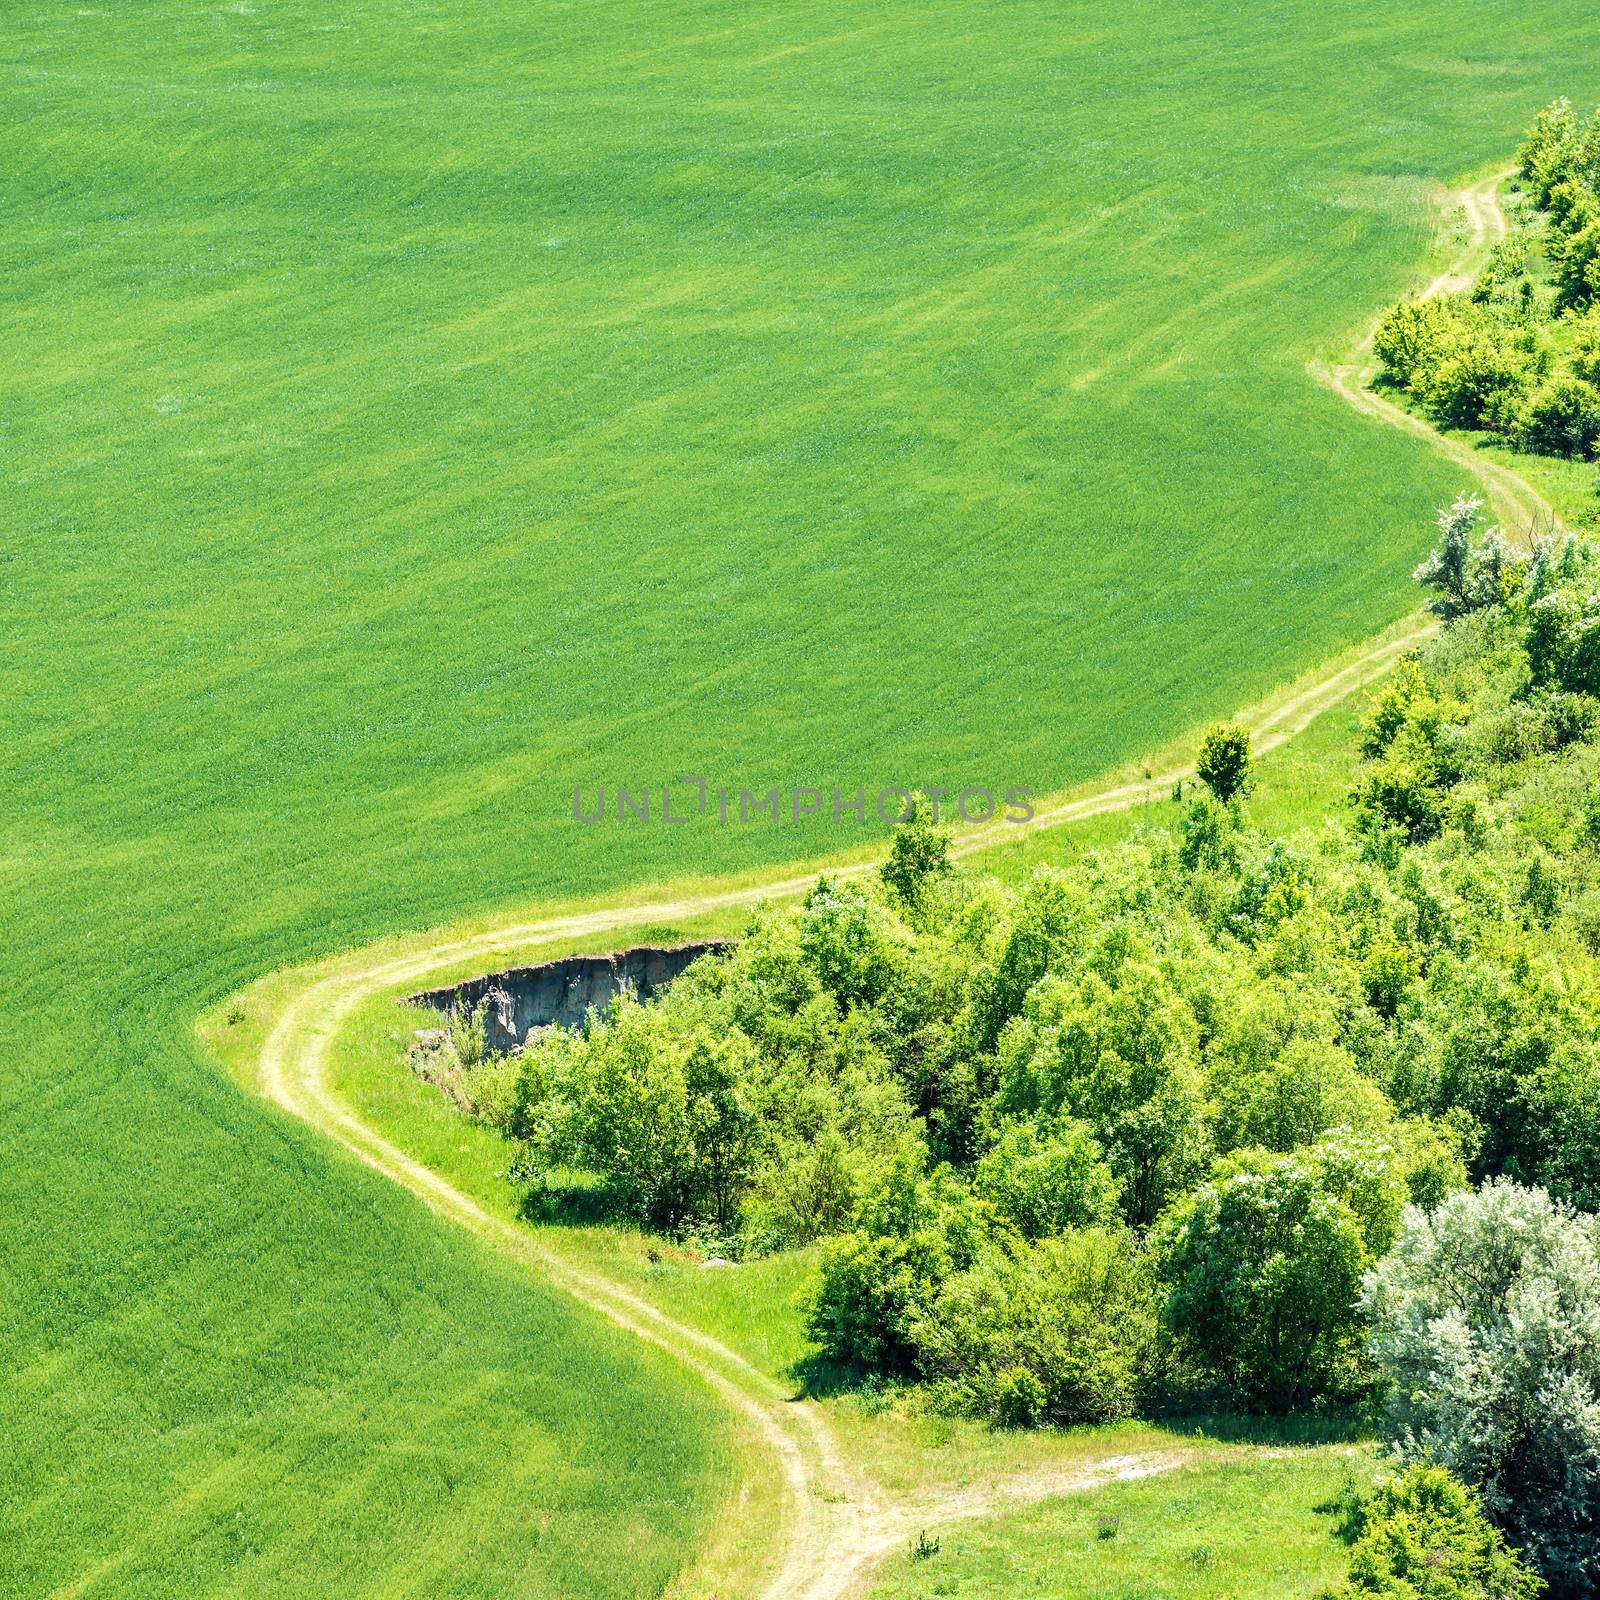 Landscape with green grass field with nearby forest and country road passing by. Aerial view